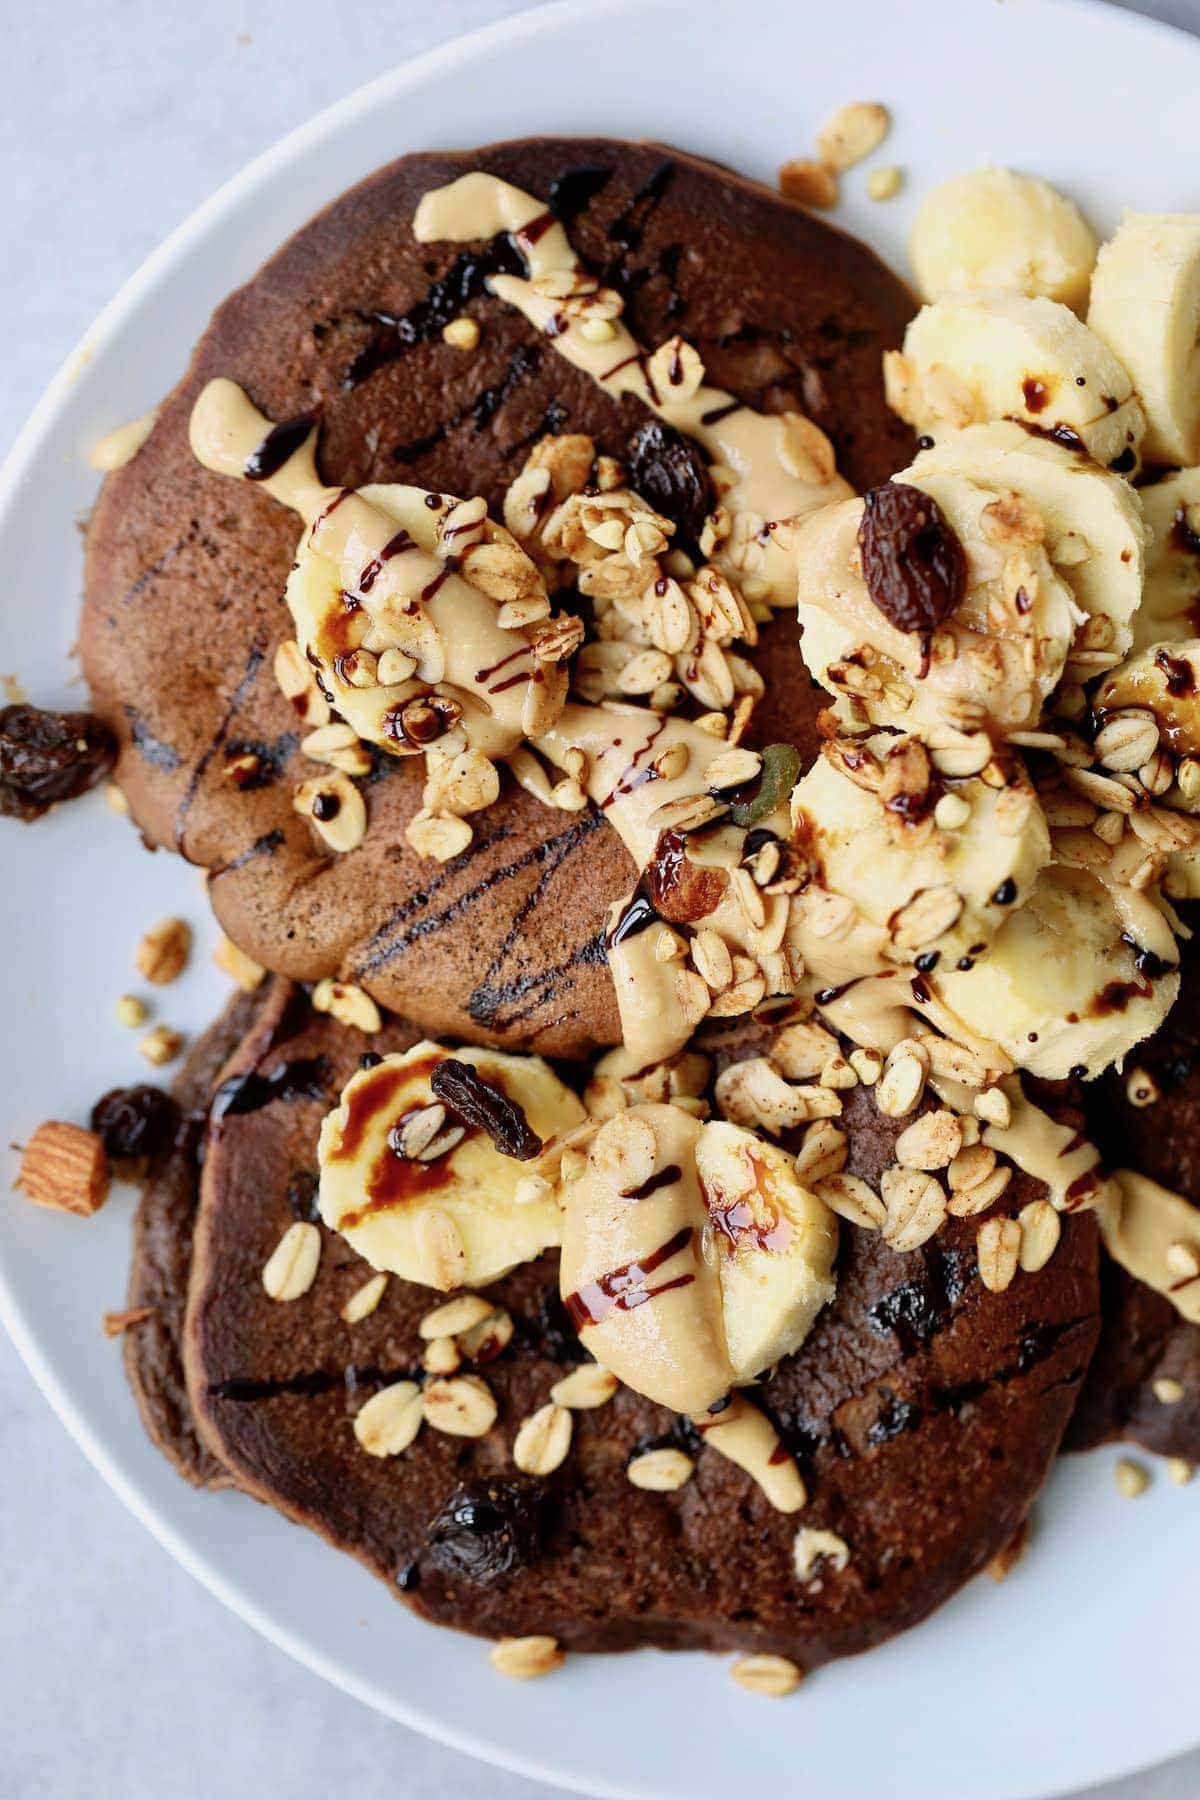 chocolate chickpea flour pancakes topped with banana, peanut butter and granola